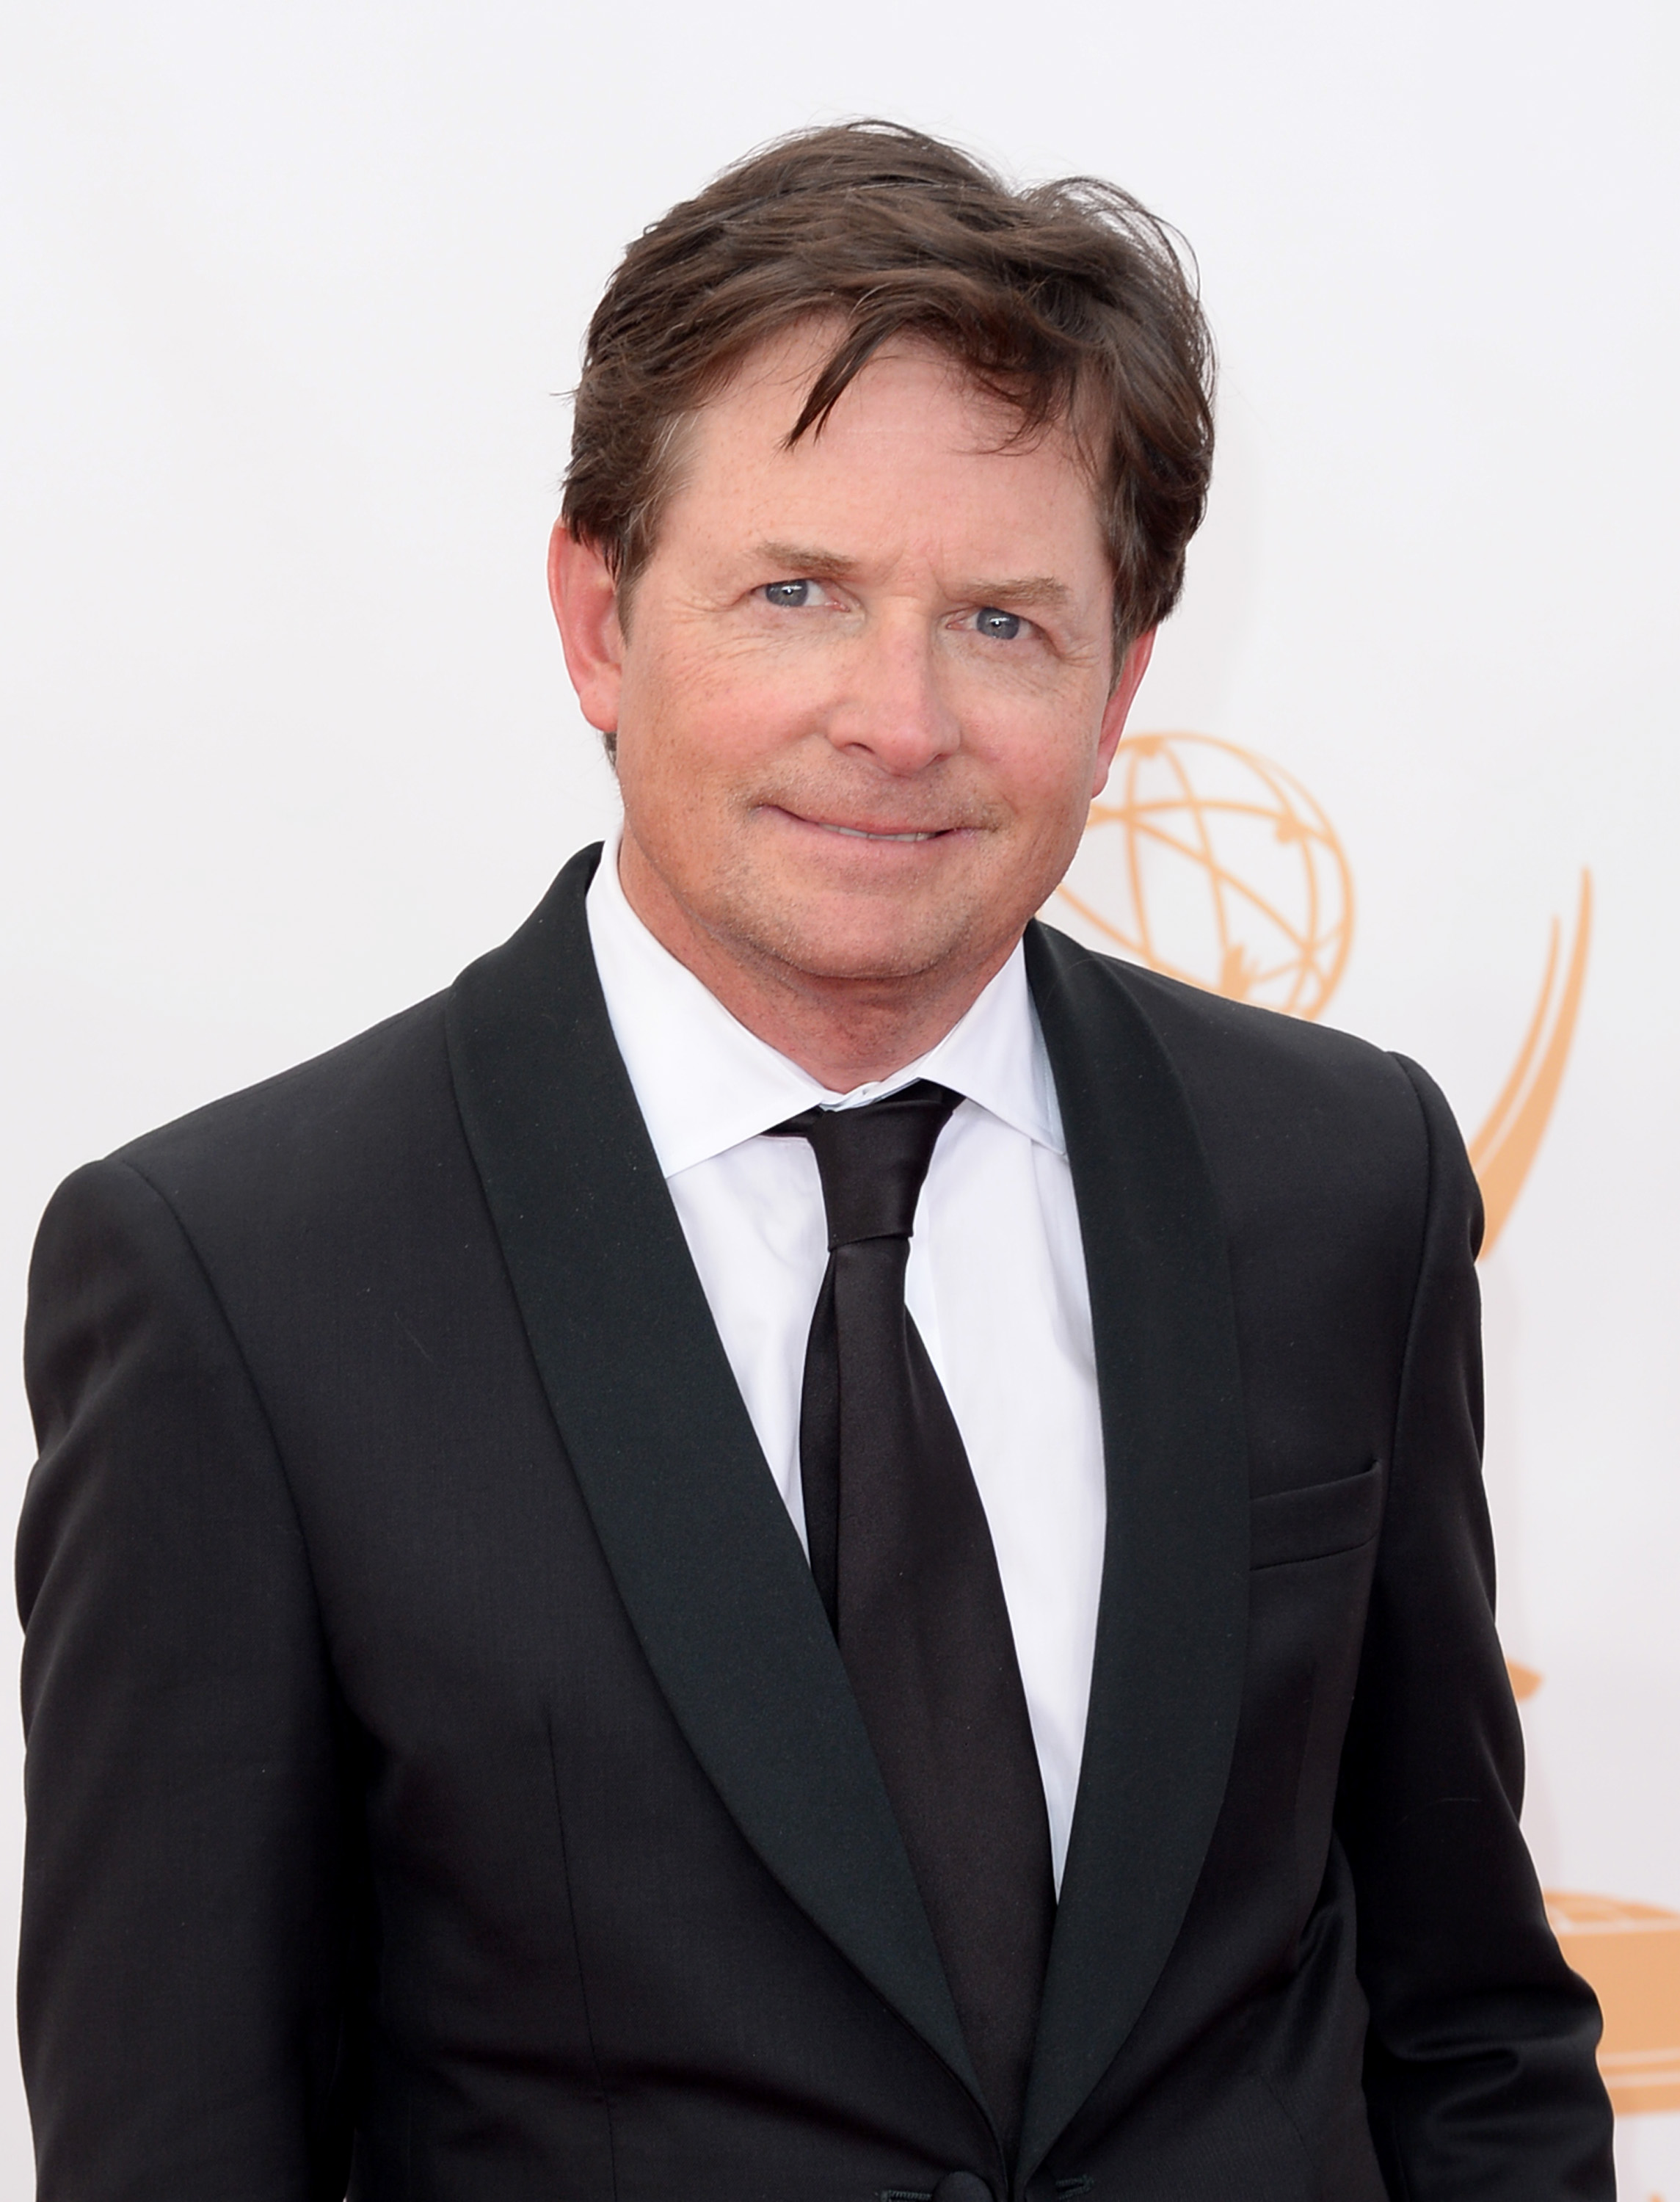 See Michael J. Fox's Changing Looks Through the Years!